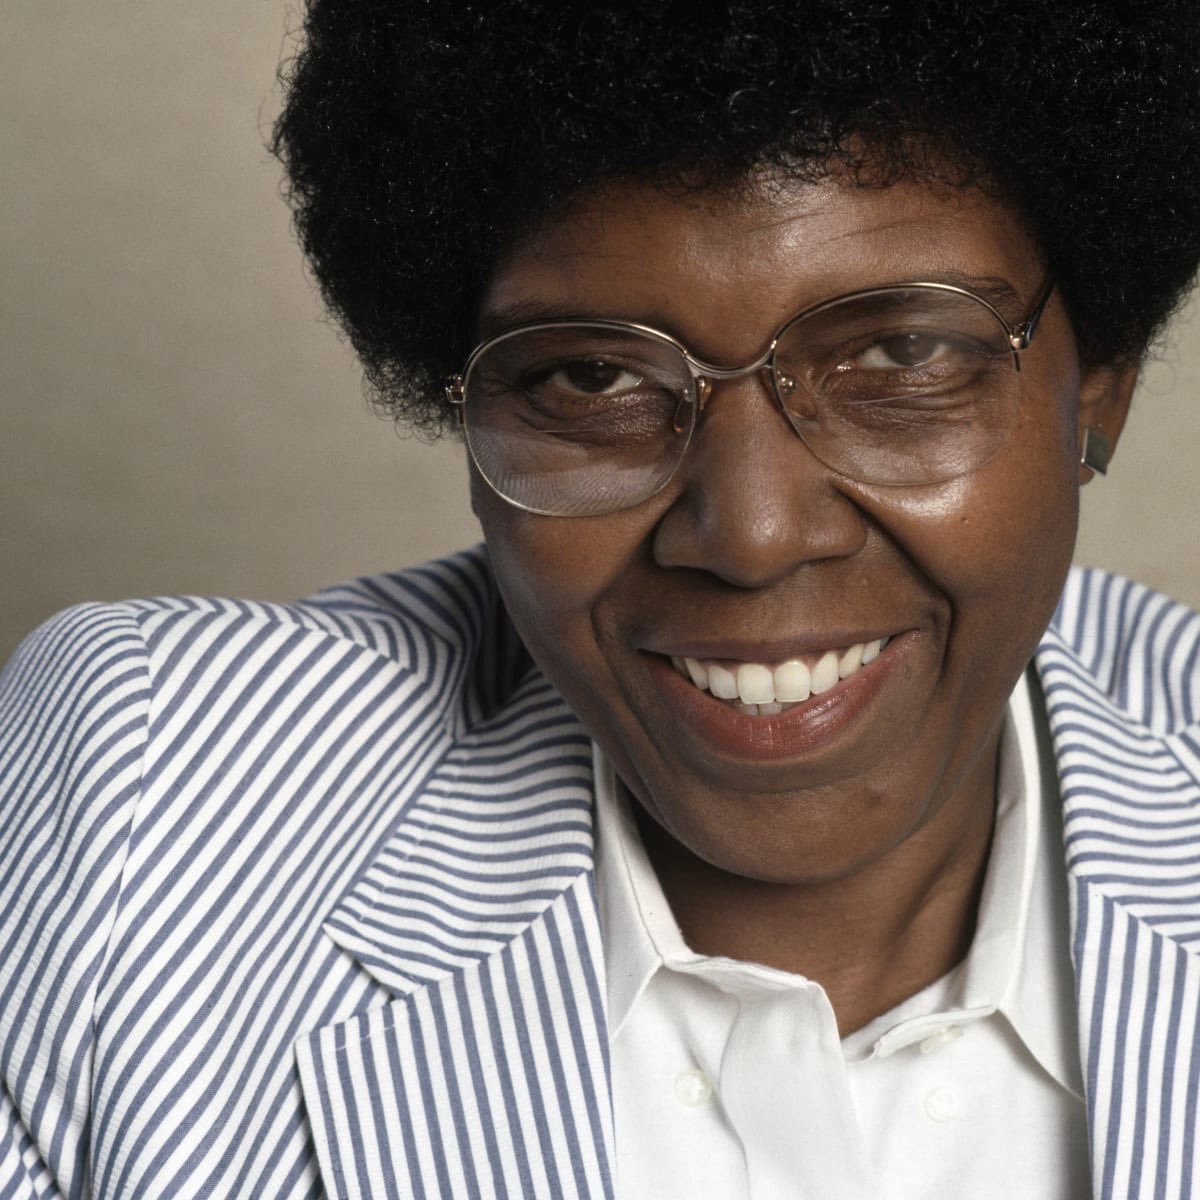 Barbara Jordan, one of the greatest stateswomen of Texas and that this country has ever produced, was a lesbian. Fitting that Houston, her hometown, was the 1st major city to elect an openly gay mayor (Annise Parker).   https://reviews-and-ramblings.dreamwidth.org/4139108.html 